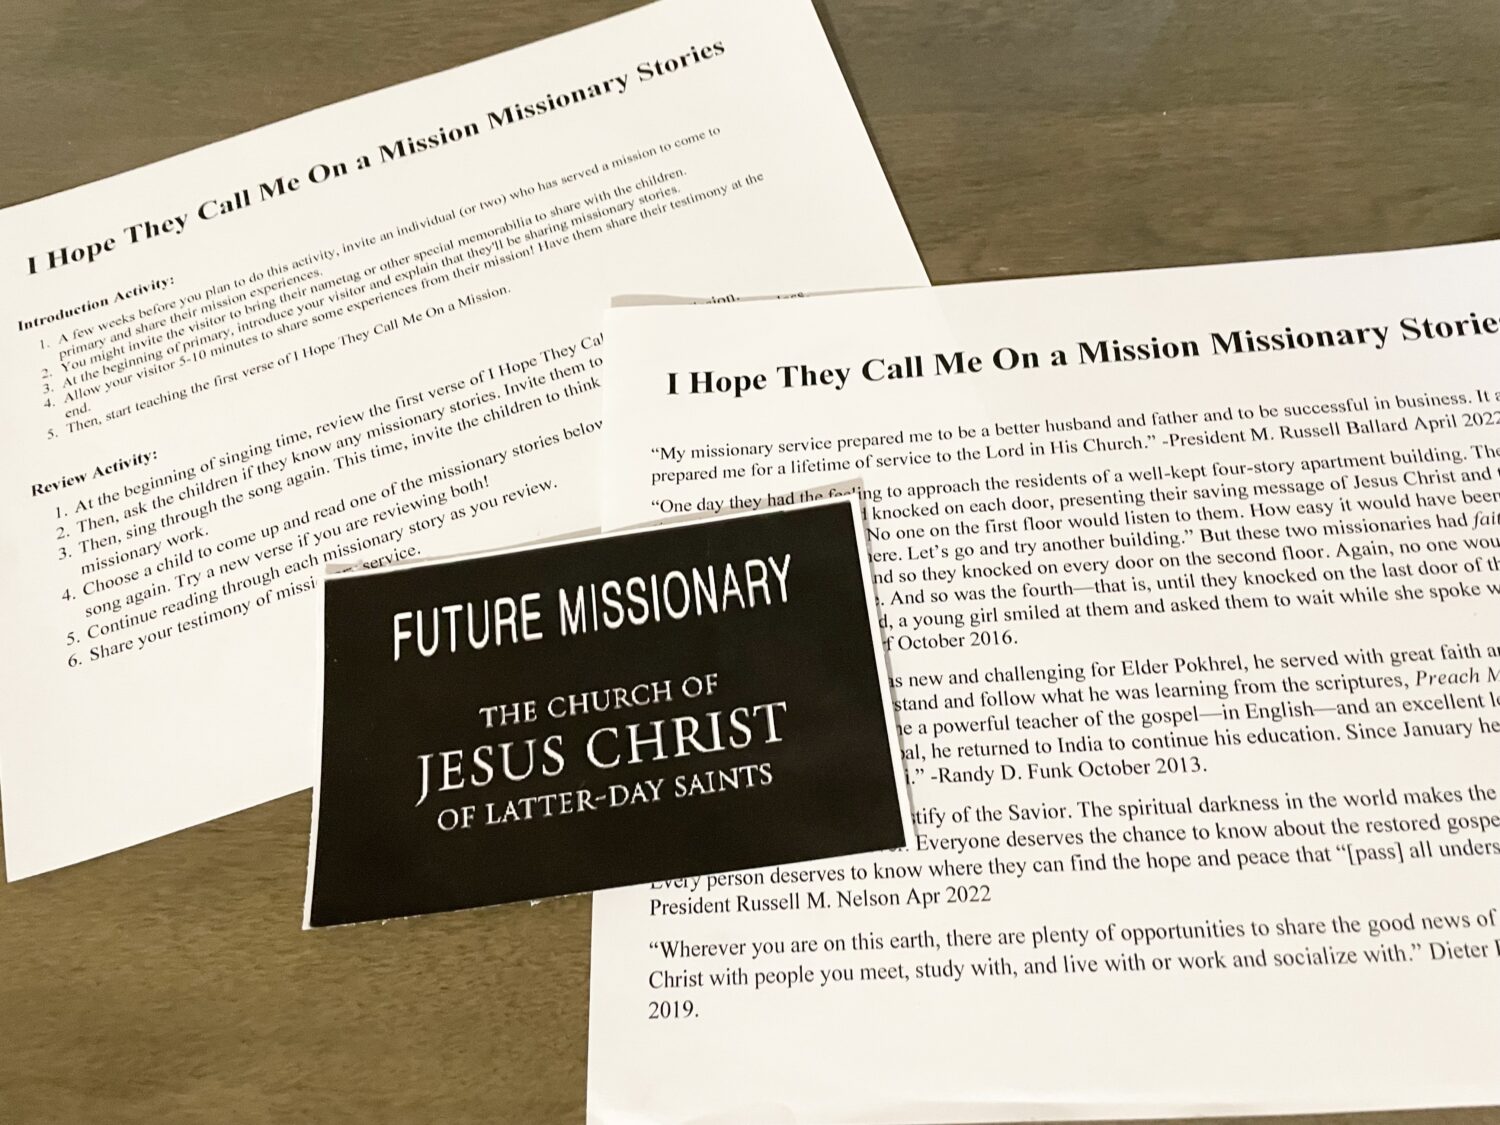 I Hope They Call Me On a Mission Missionary Stories Singing time ideas for Primary Music Leaders IMG 7261